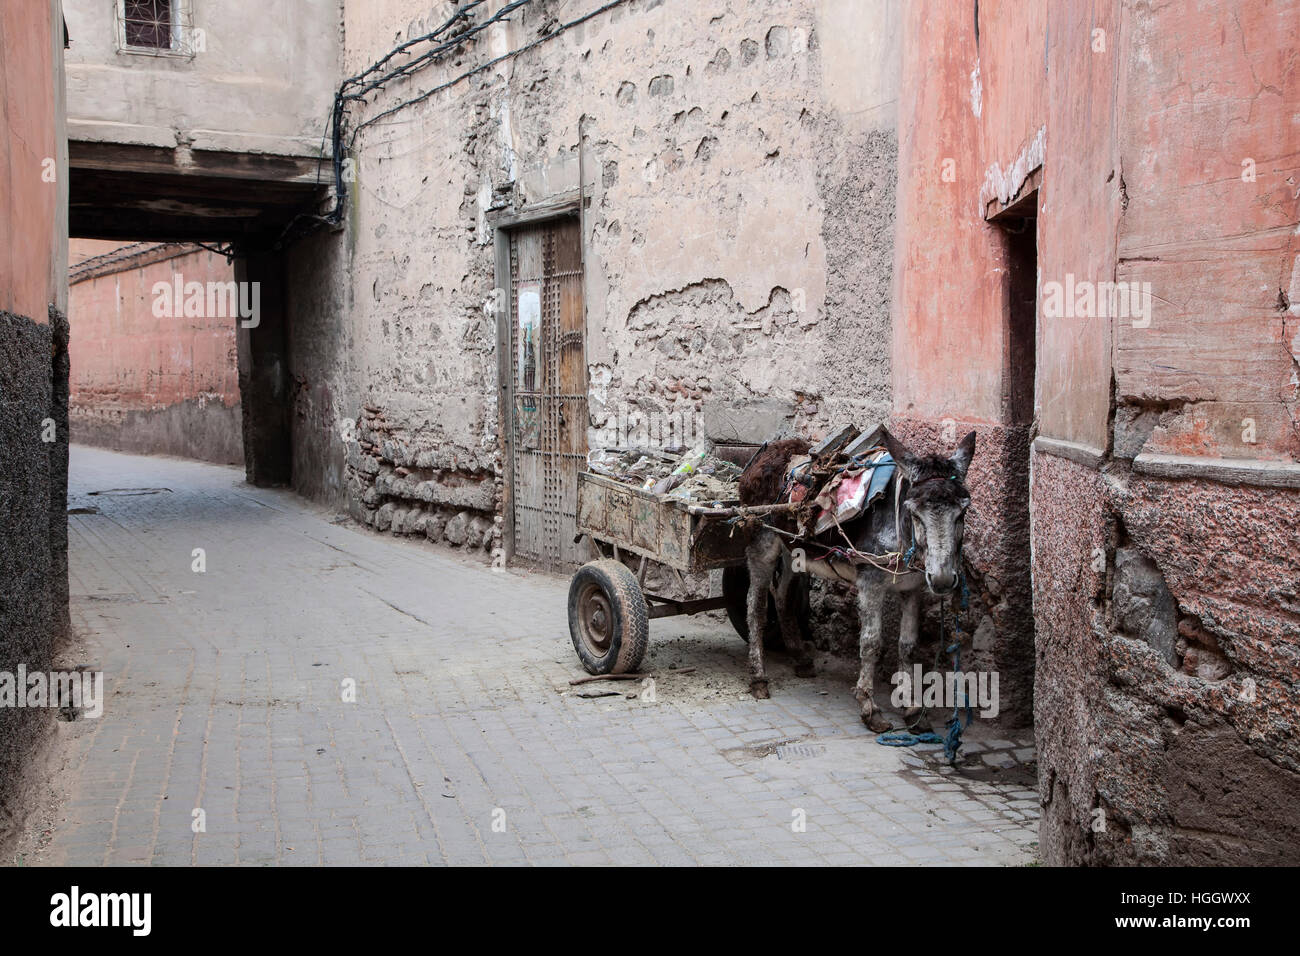 Burro and cart in alley, Marrakech, Morocco Stock Photo